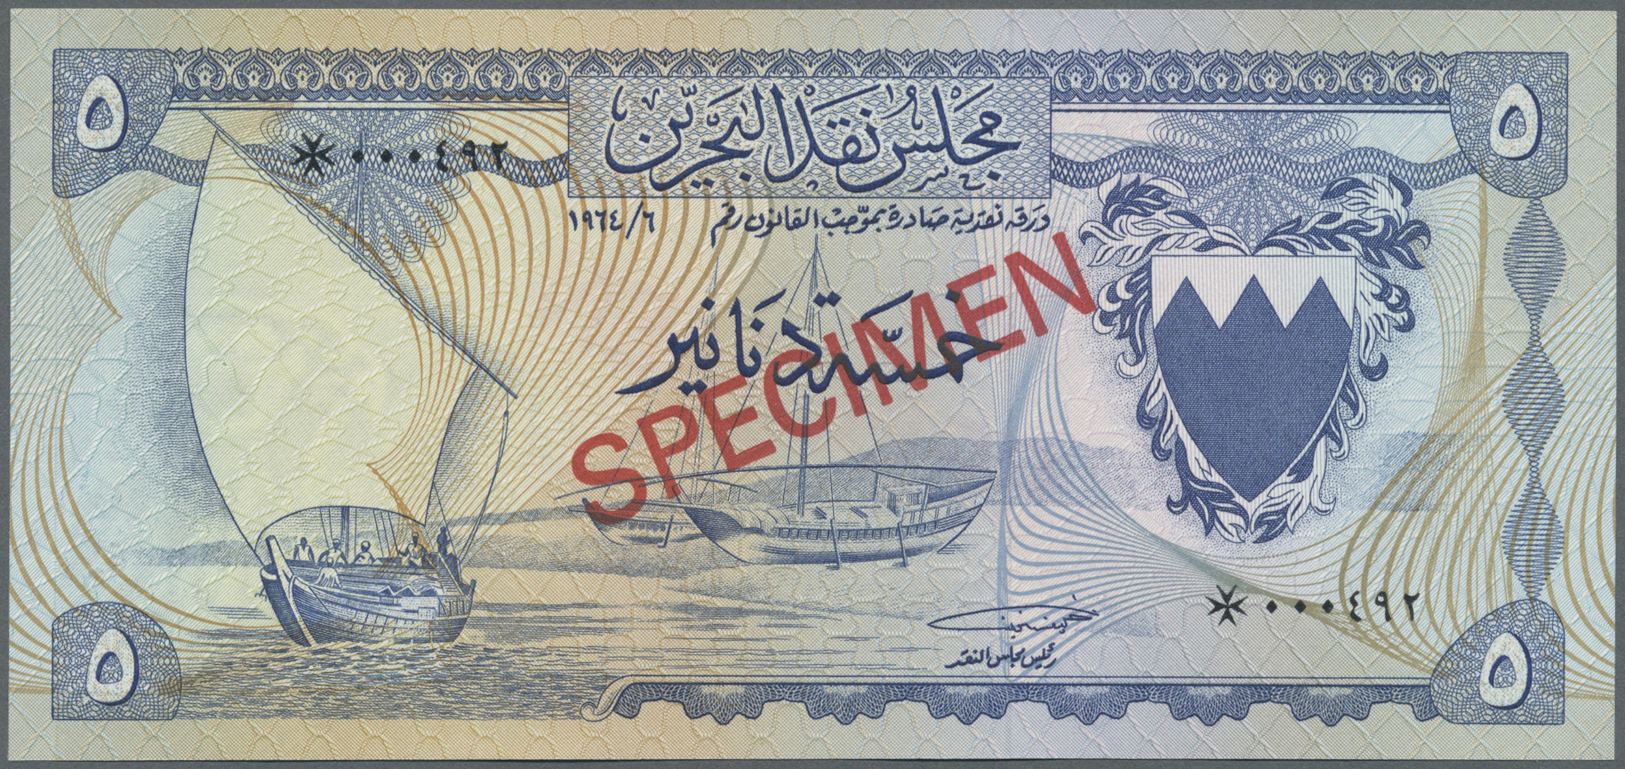 00236 Bahrain: 5 Dinars ND Collectors Series Speicmen With Maltese Cross Prefix, Note Like Pick 5 But Issue Listed At CS - Bahrain